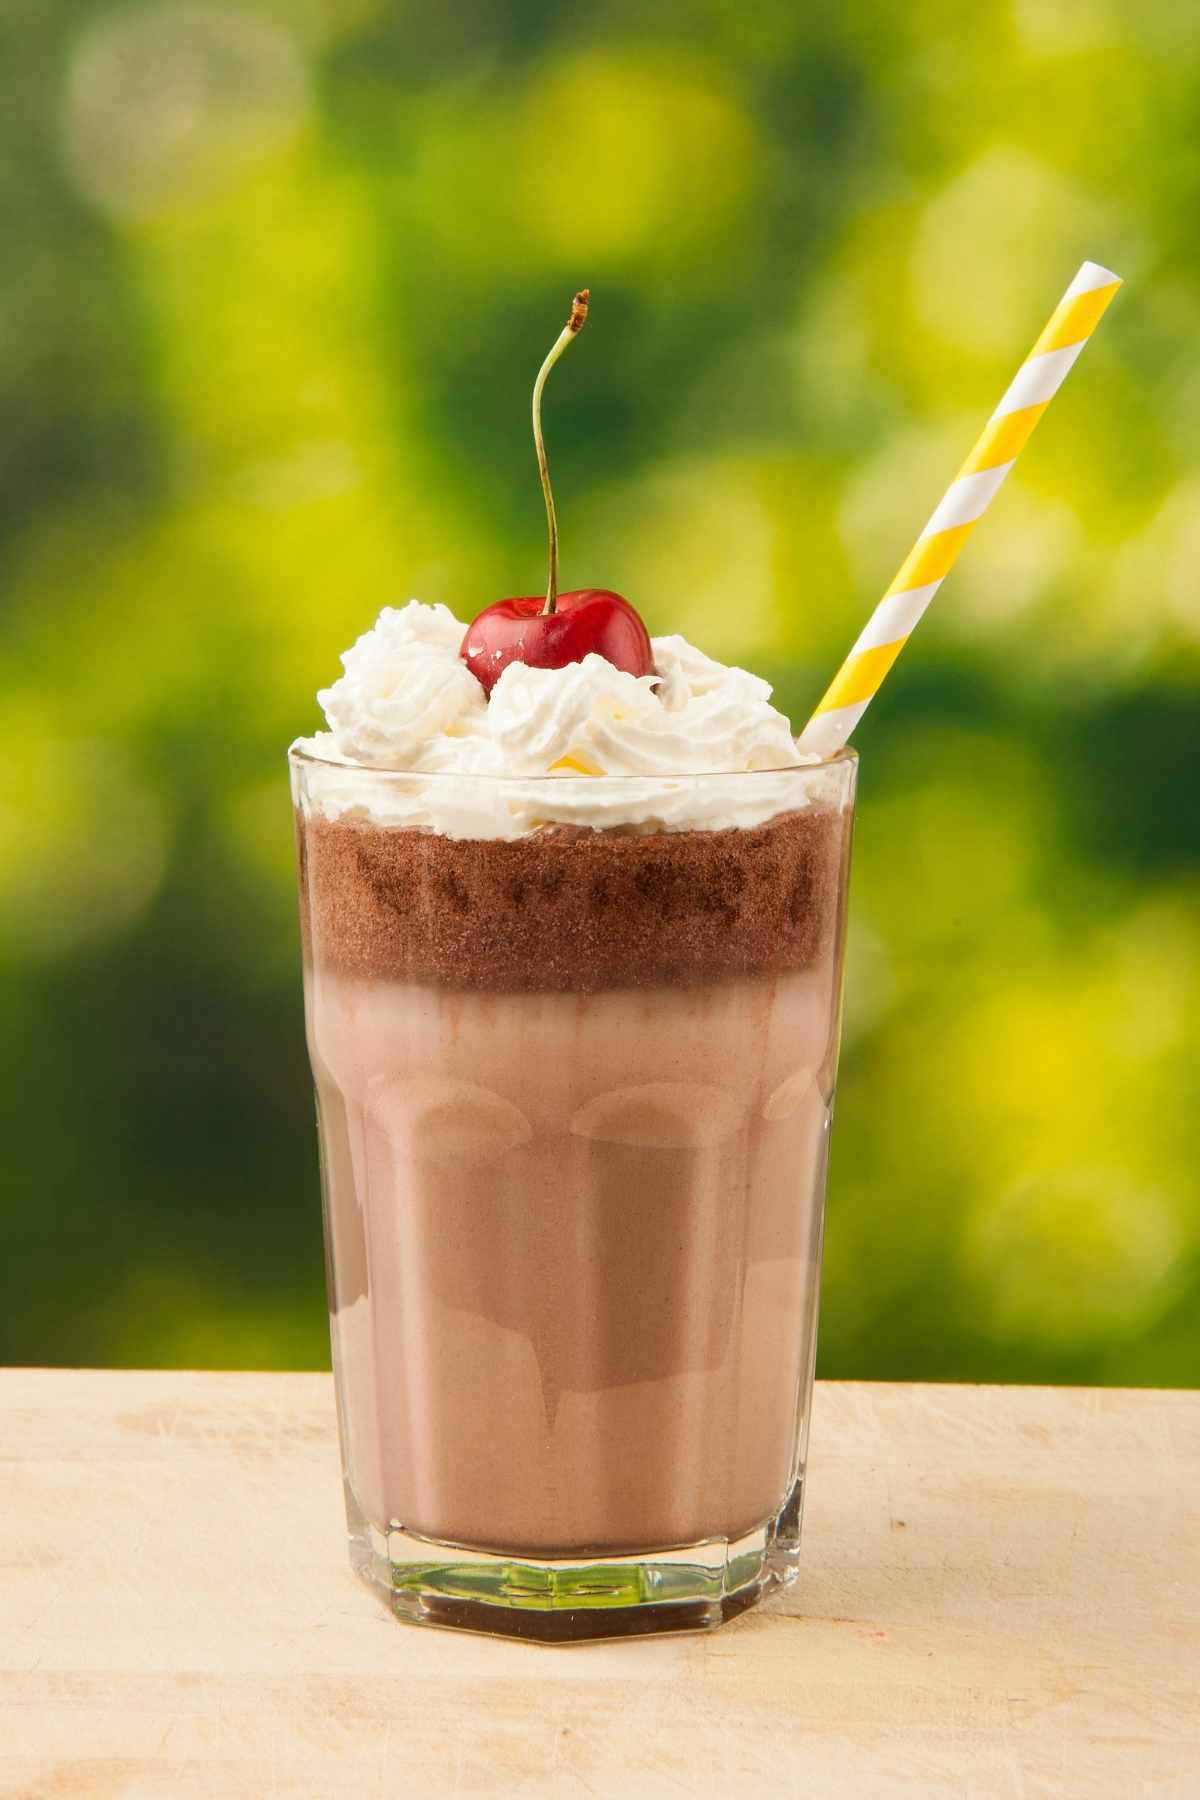 The next time you’re craving a cocktail that’s smooth, sweet, and creamy, try a Black Cow. It’s made with Kahlua, root beer, chocolate ice cream, and whipped cream